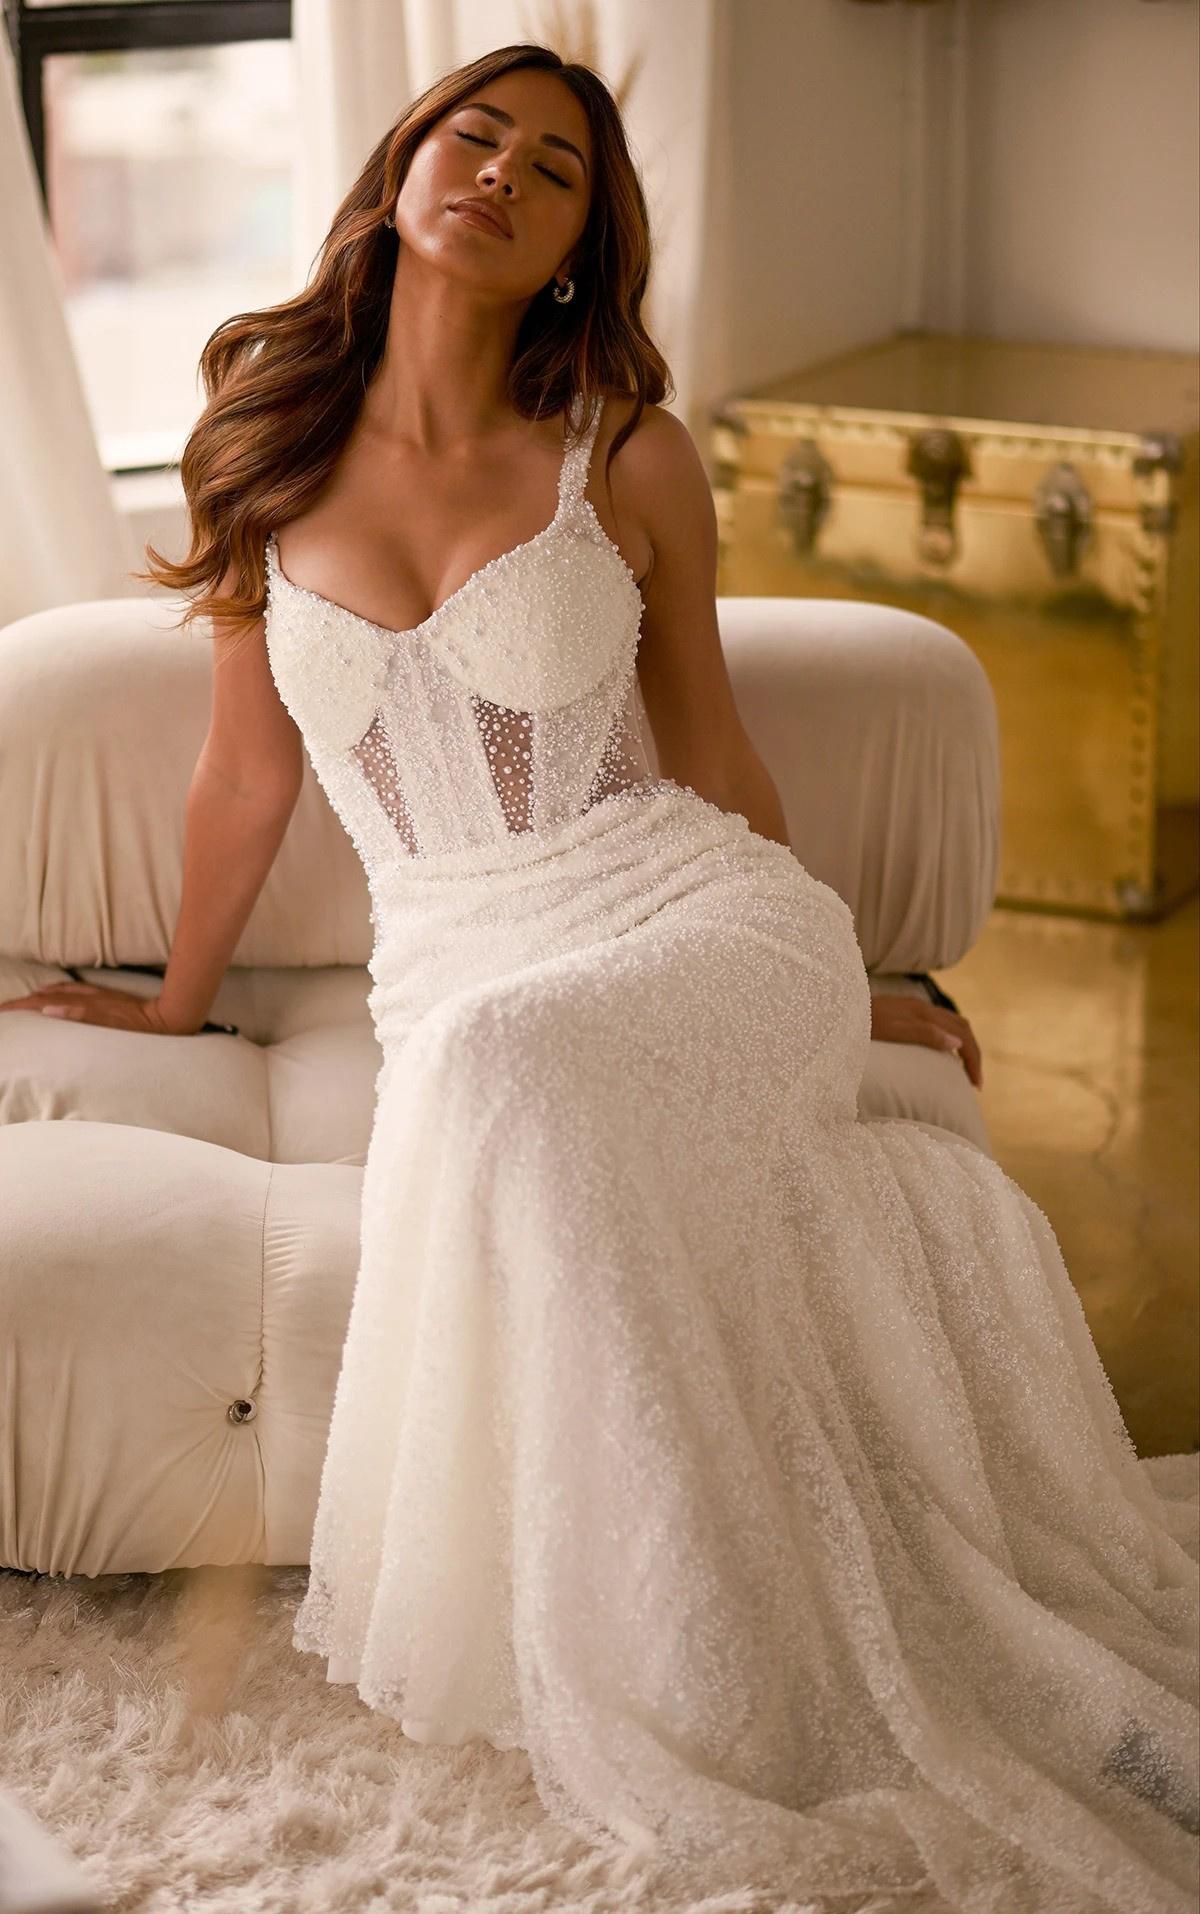 23 Second Wedding Dresses for Second Marriages or Reception Looks